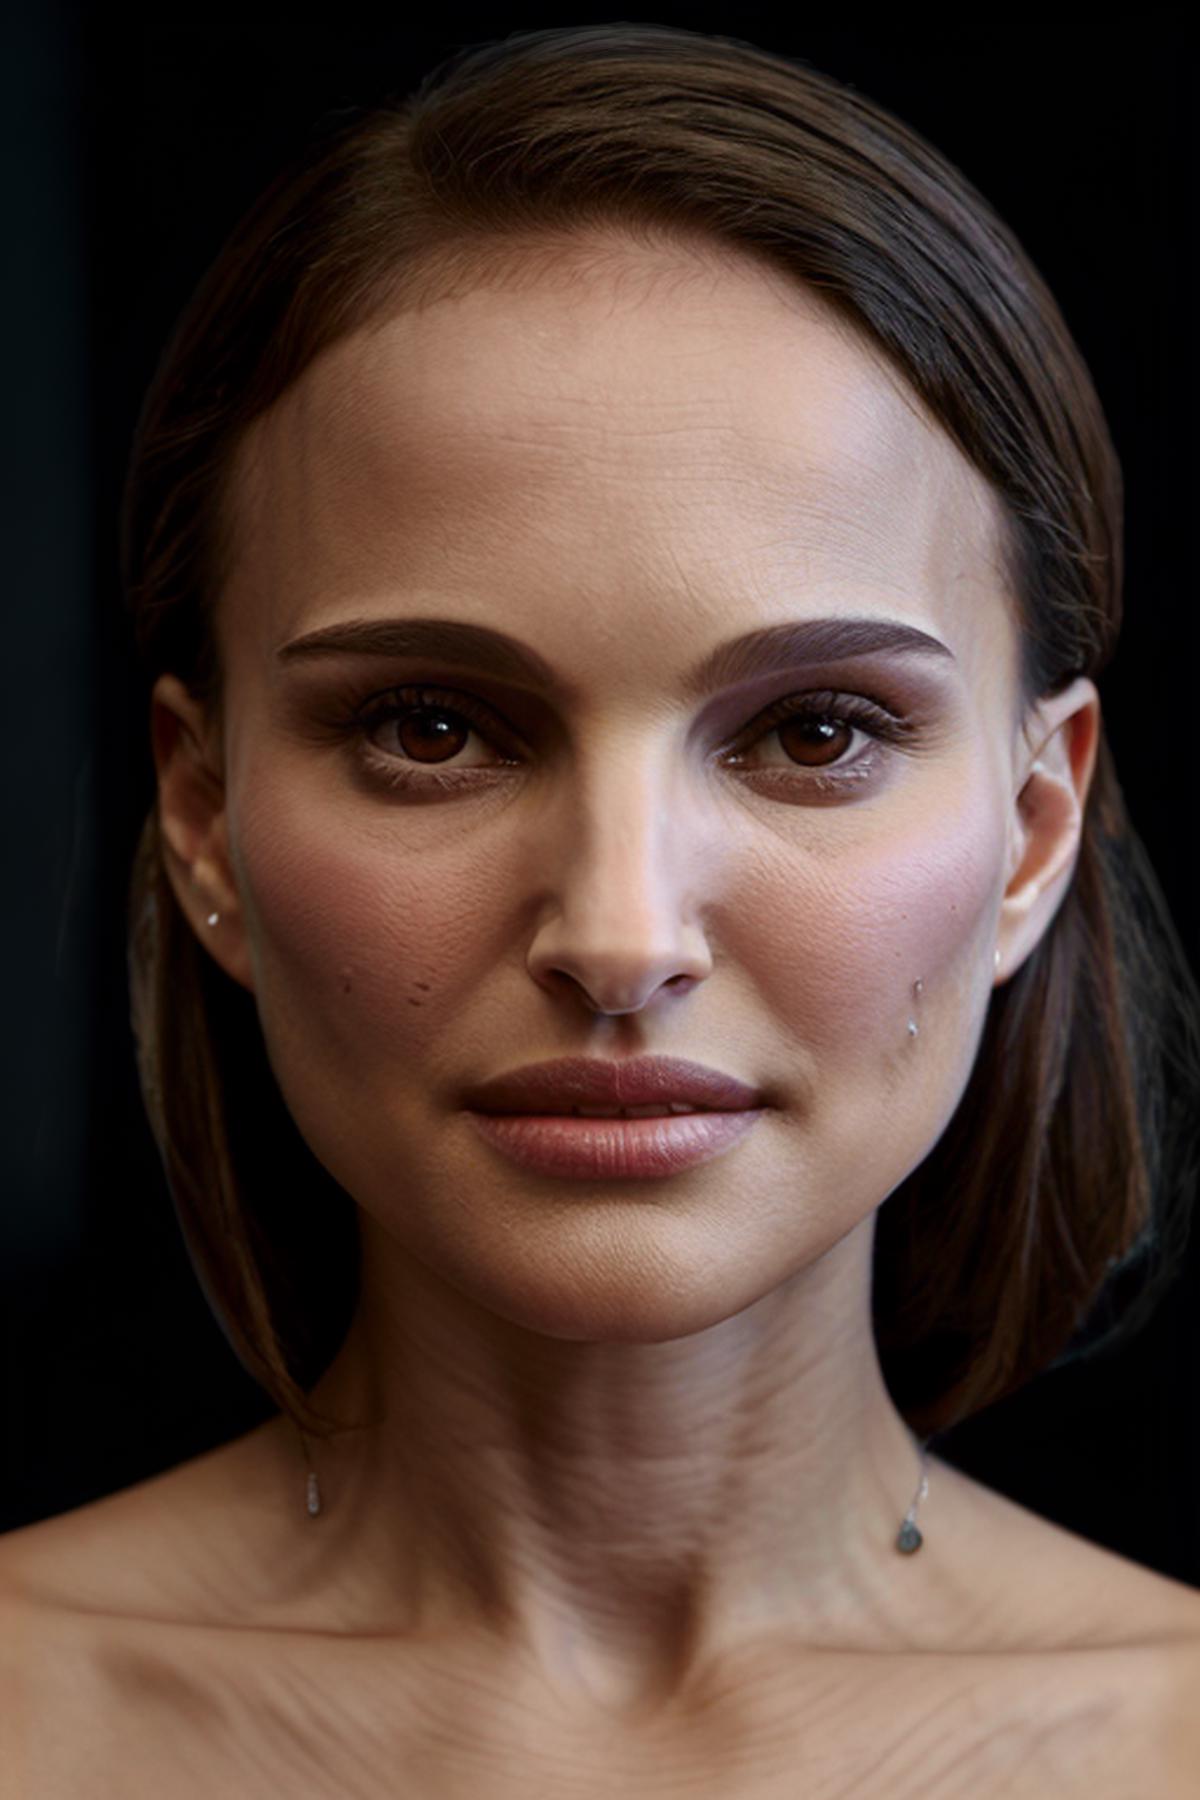 Natalie Portman (from her best known movies) image by AstralNemesis